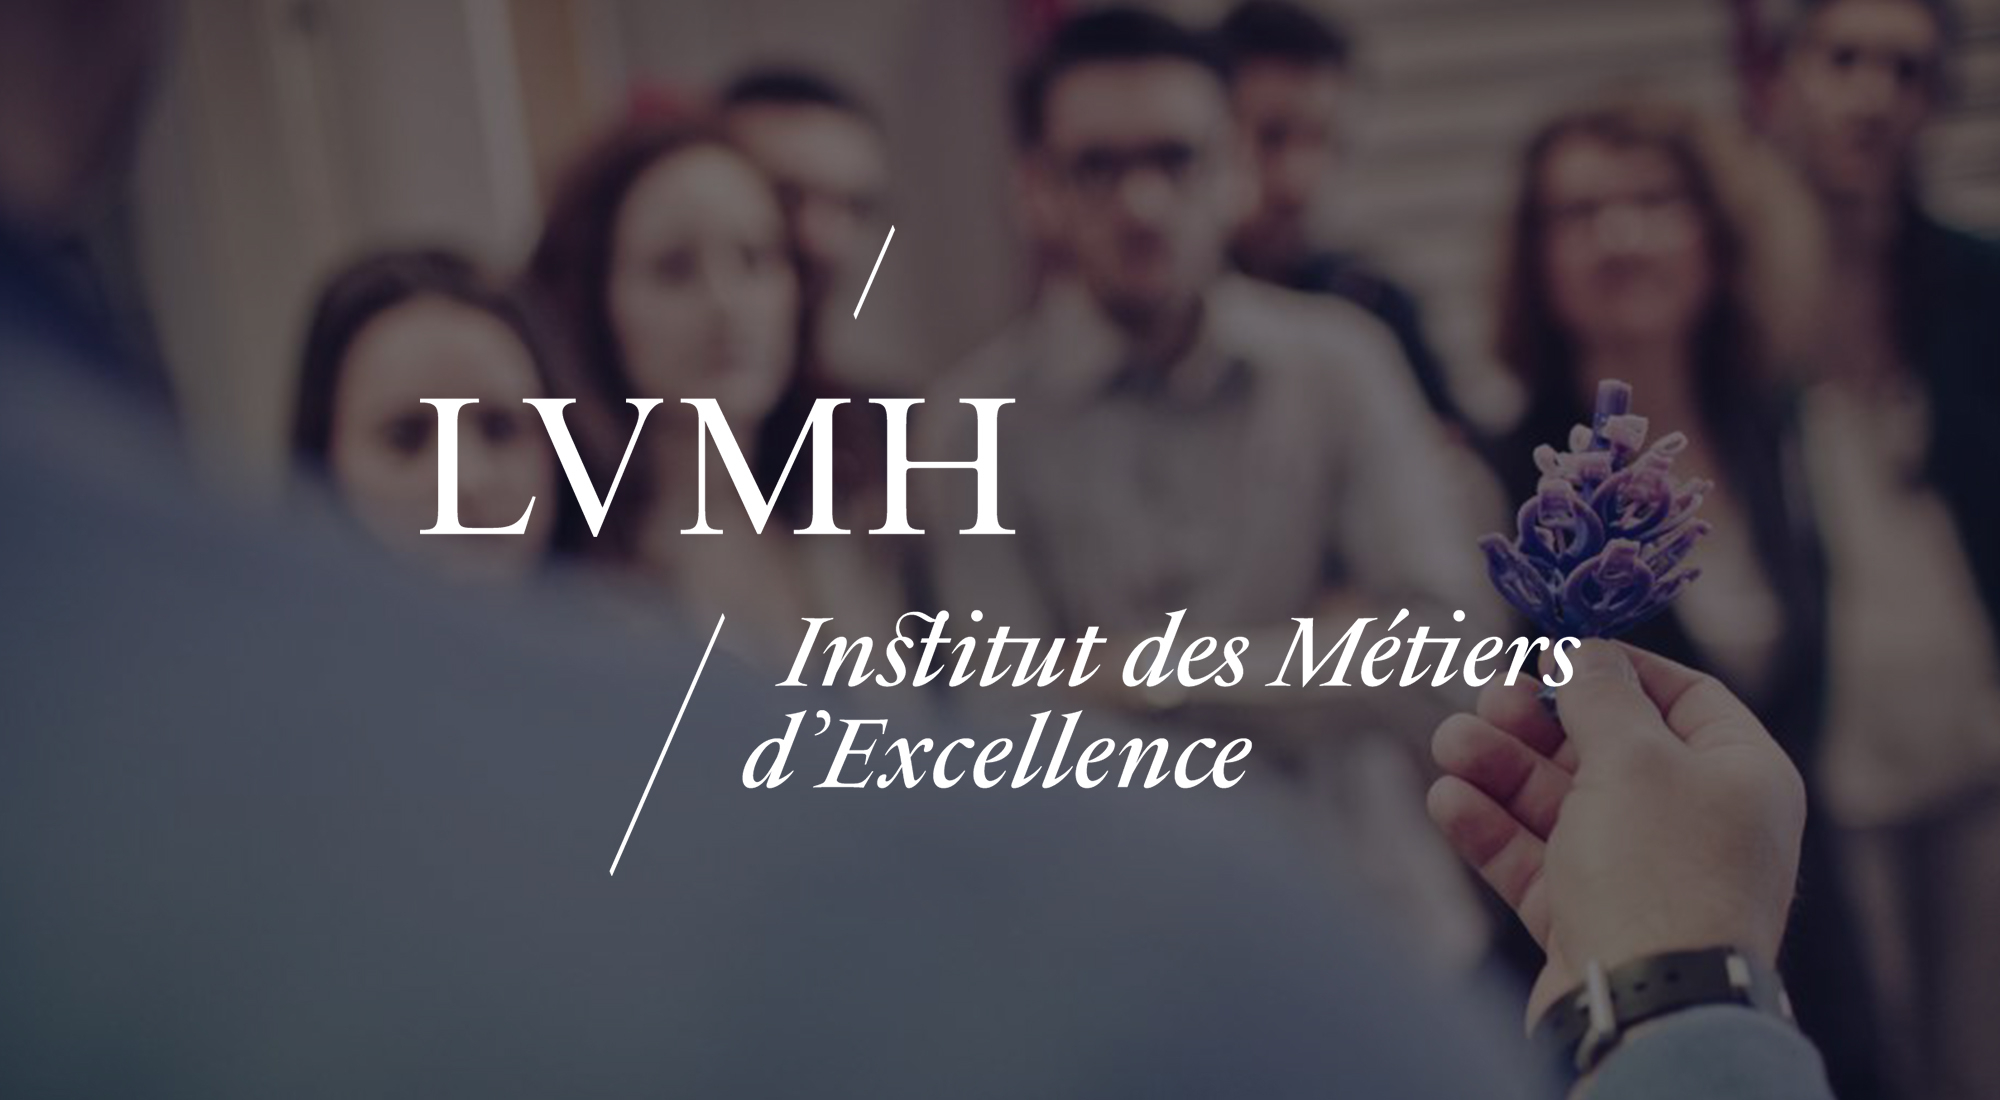 Press, Media, Exceptional places and arts - Other activities – LVMH